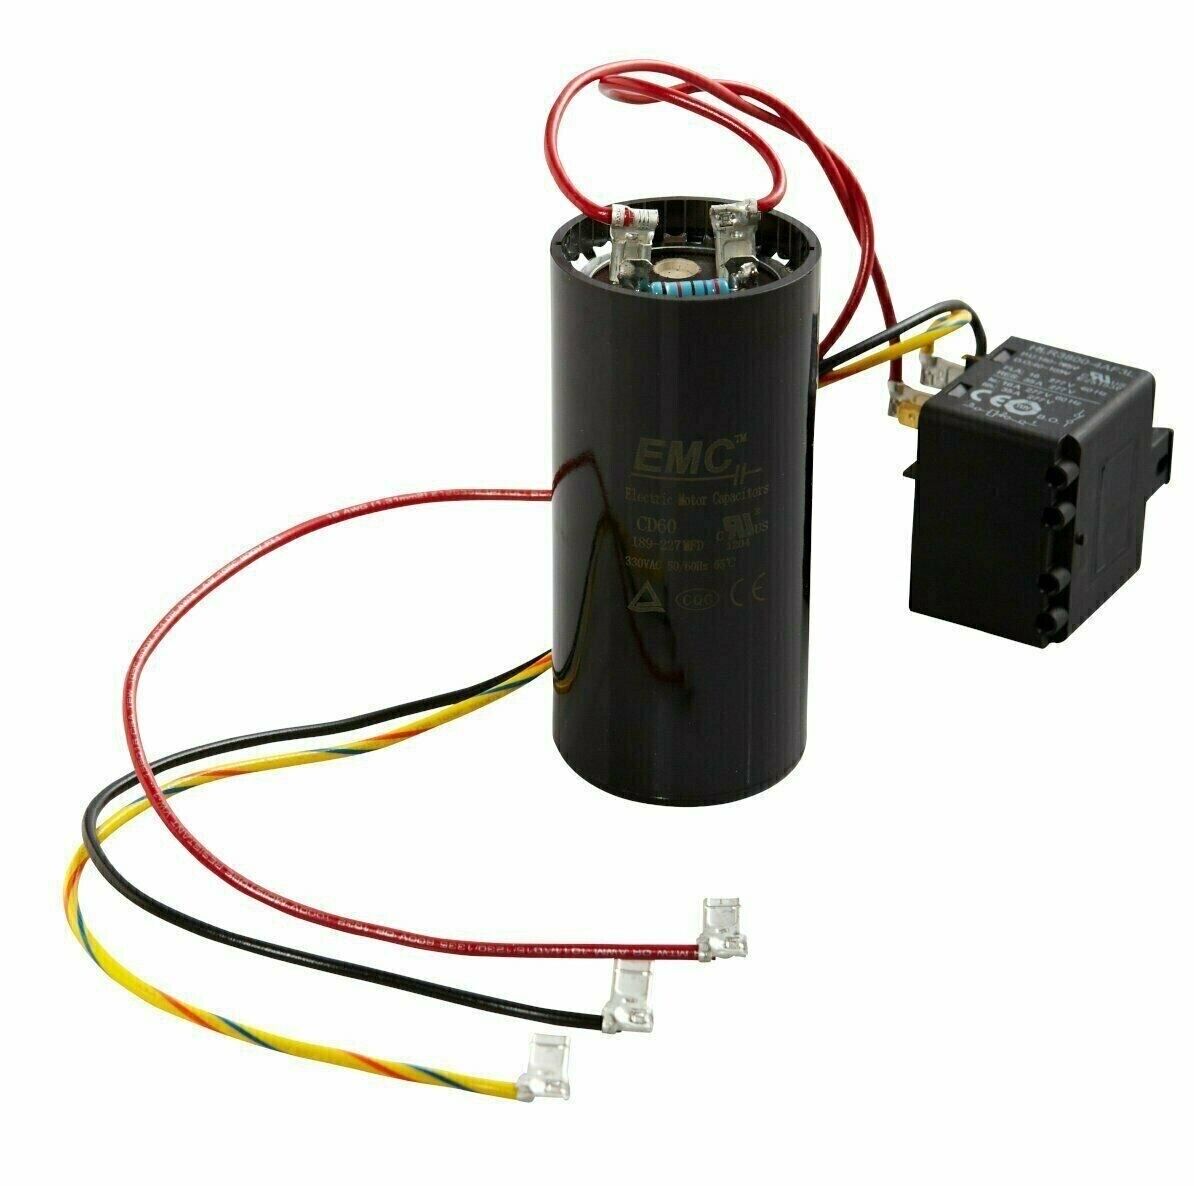 5-2-1 Compressor Saver Kit CSRU1 Hard Start Capacitor with Relay For 1-2-3 Tons